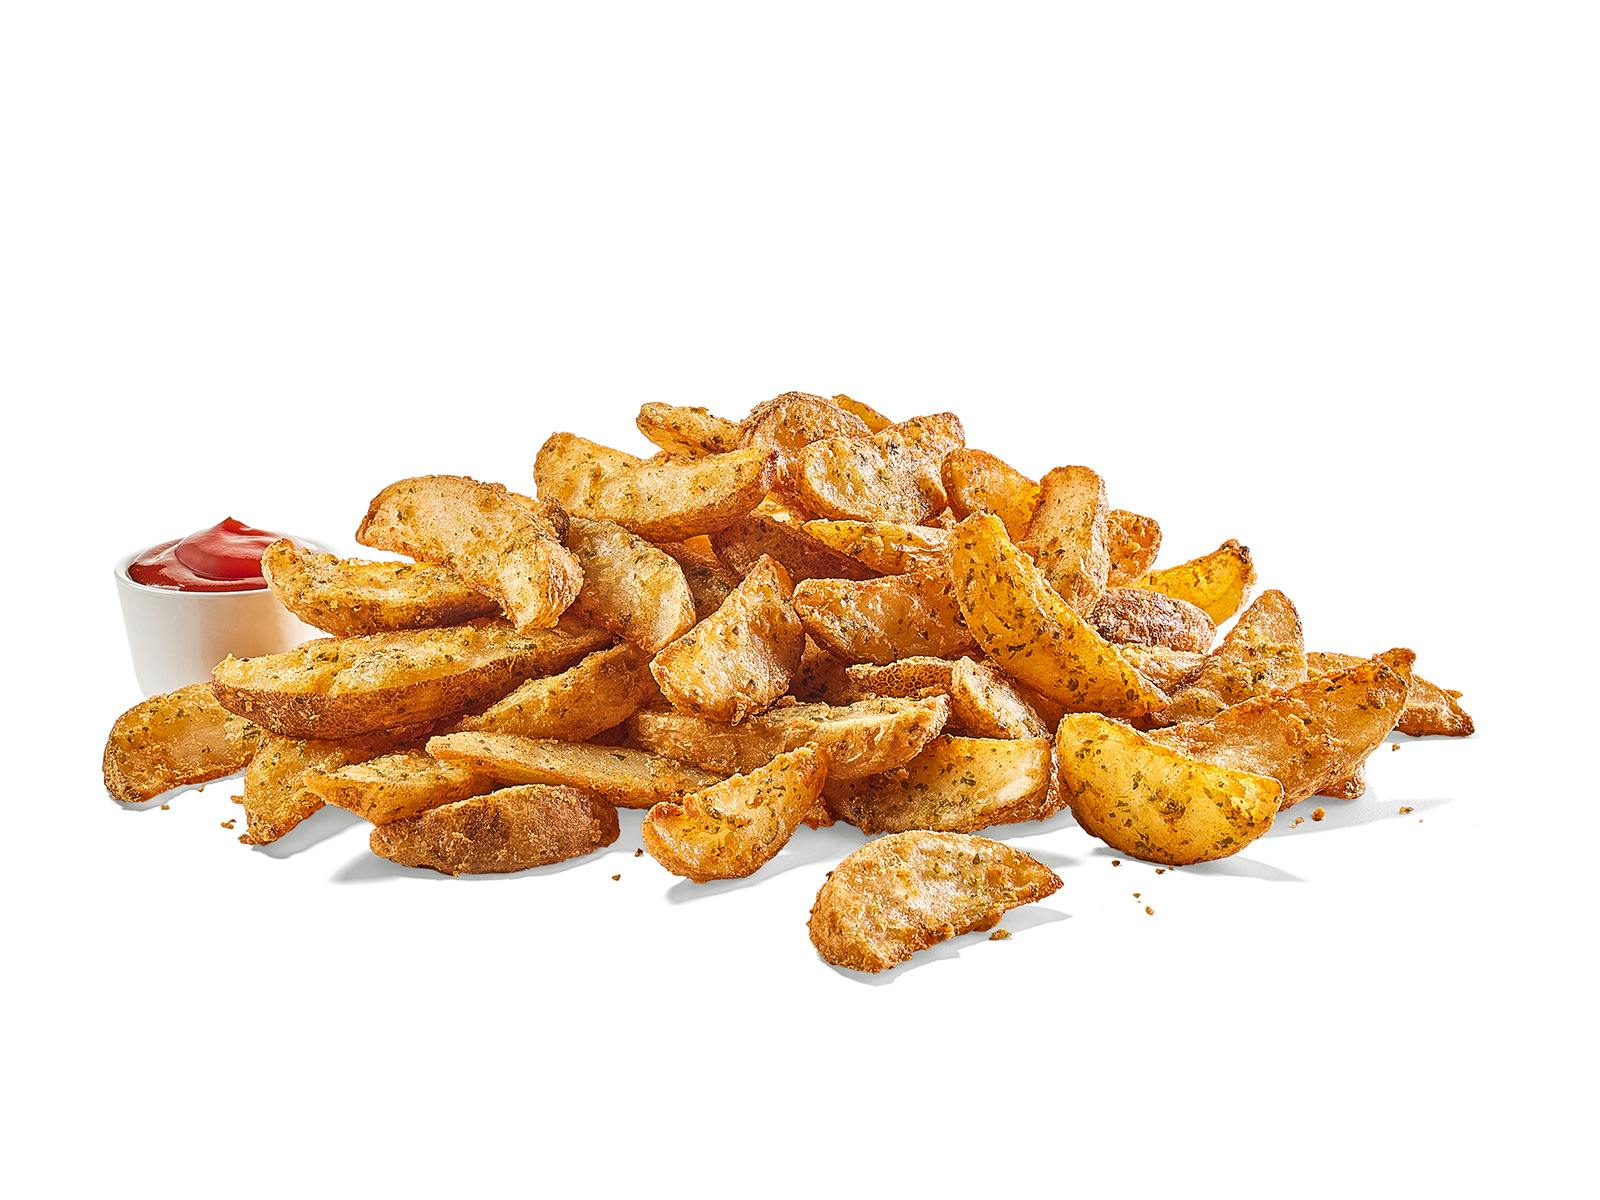 Large Potato Wedges from Buffalo Wild Wings (94) - Eau Claire in Eau Claire, WI